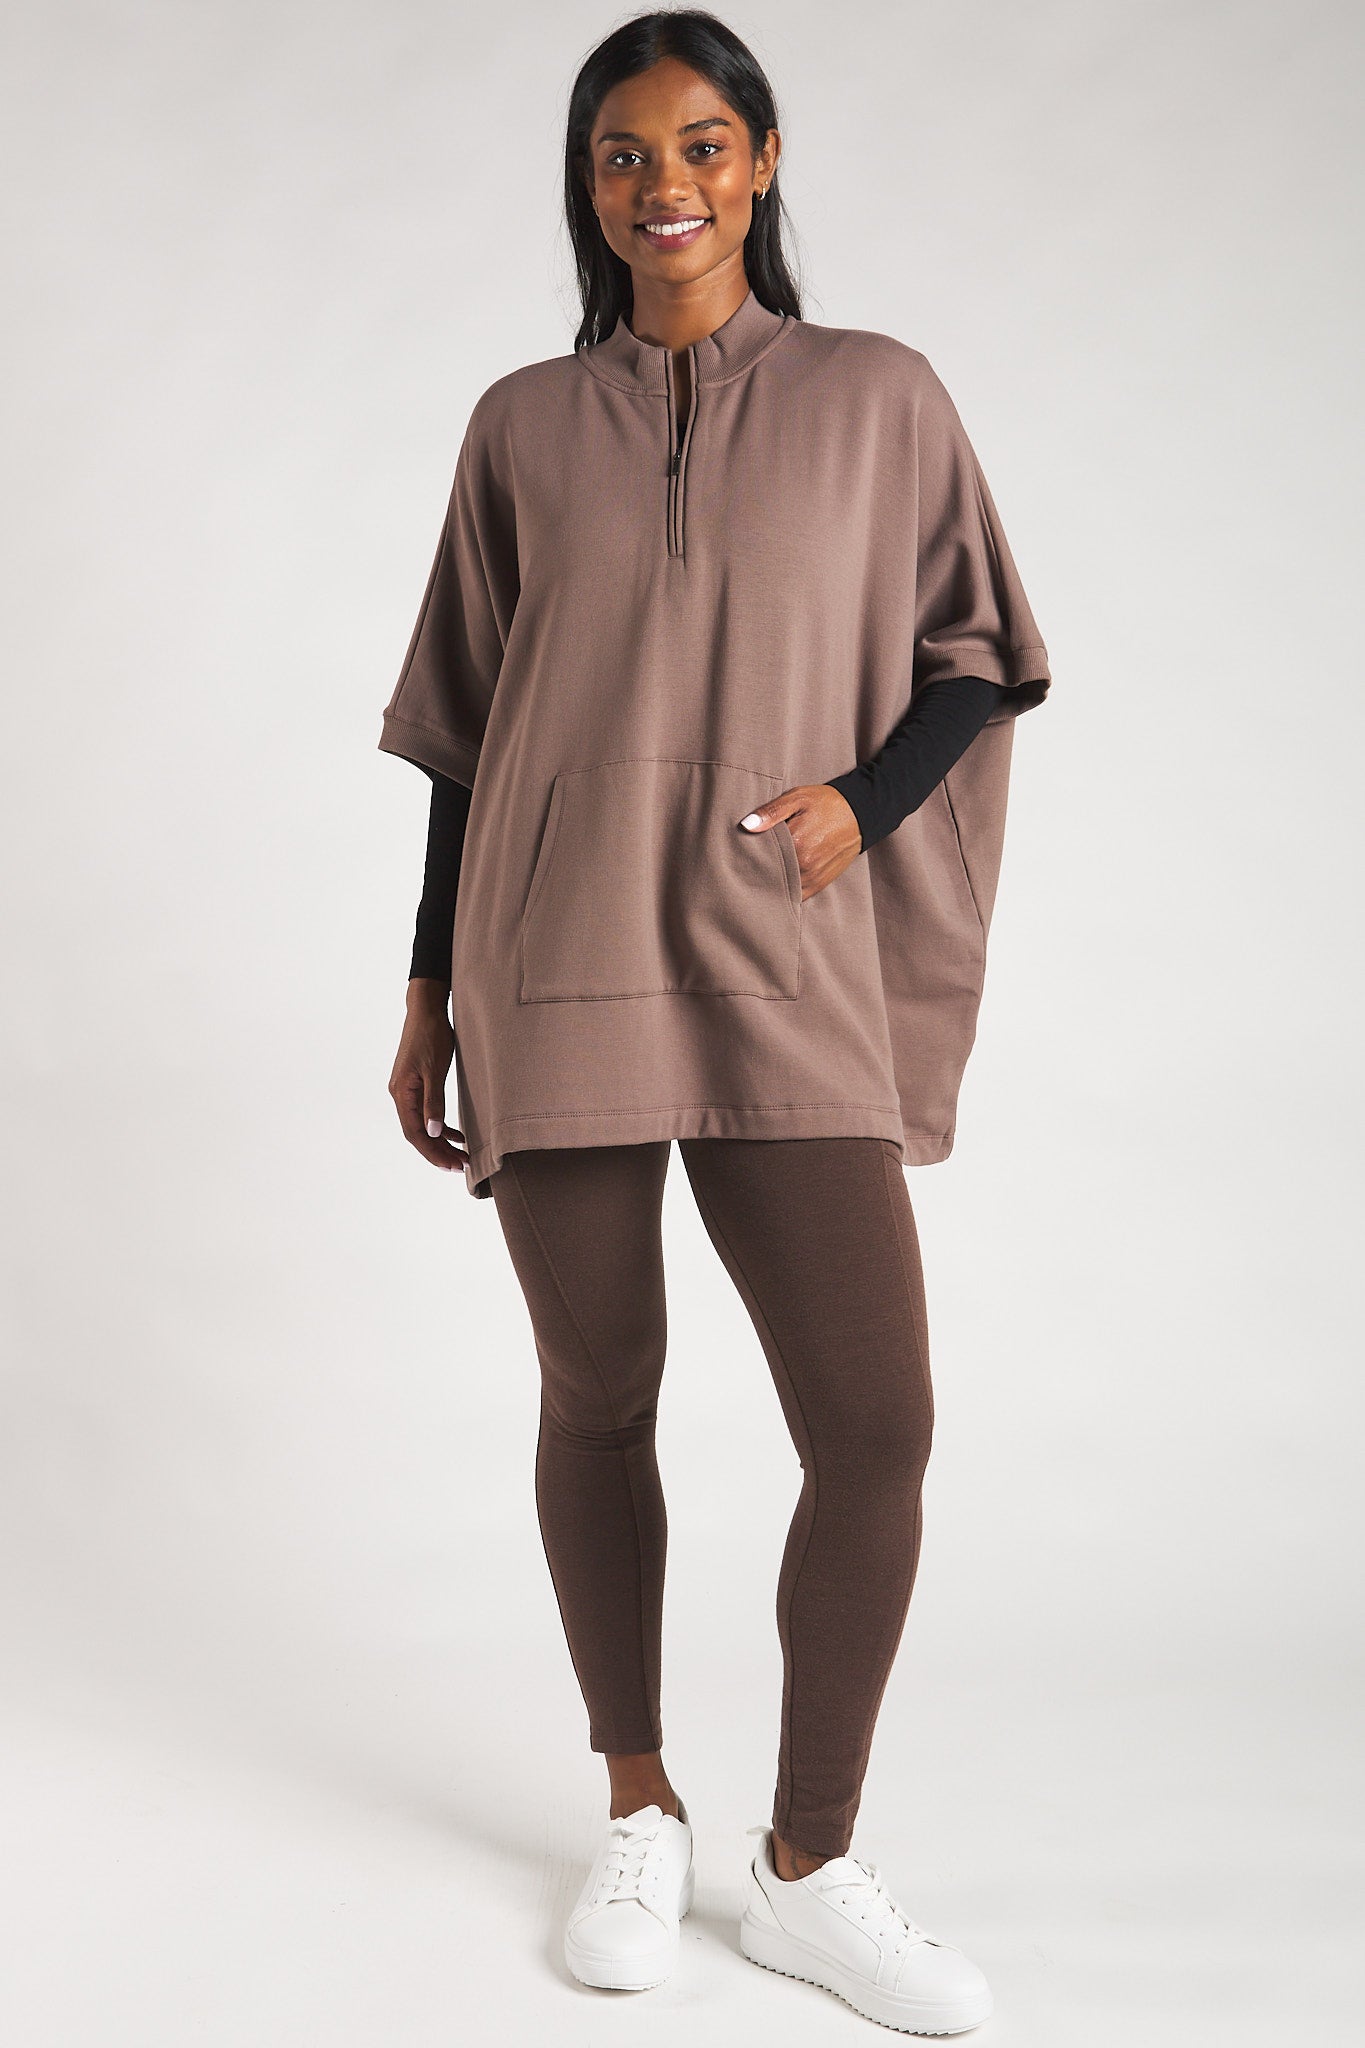  Women’s poncho sweater paired with sustainable bamboo leggings. 